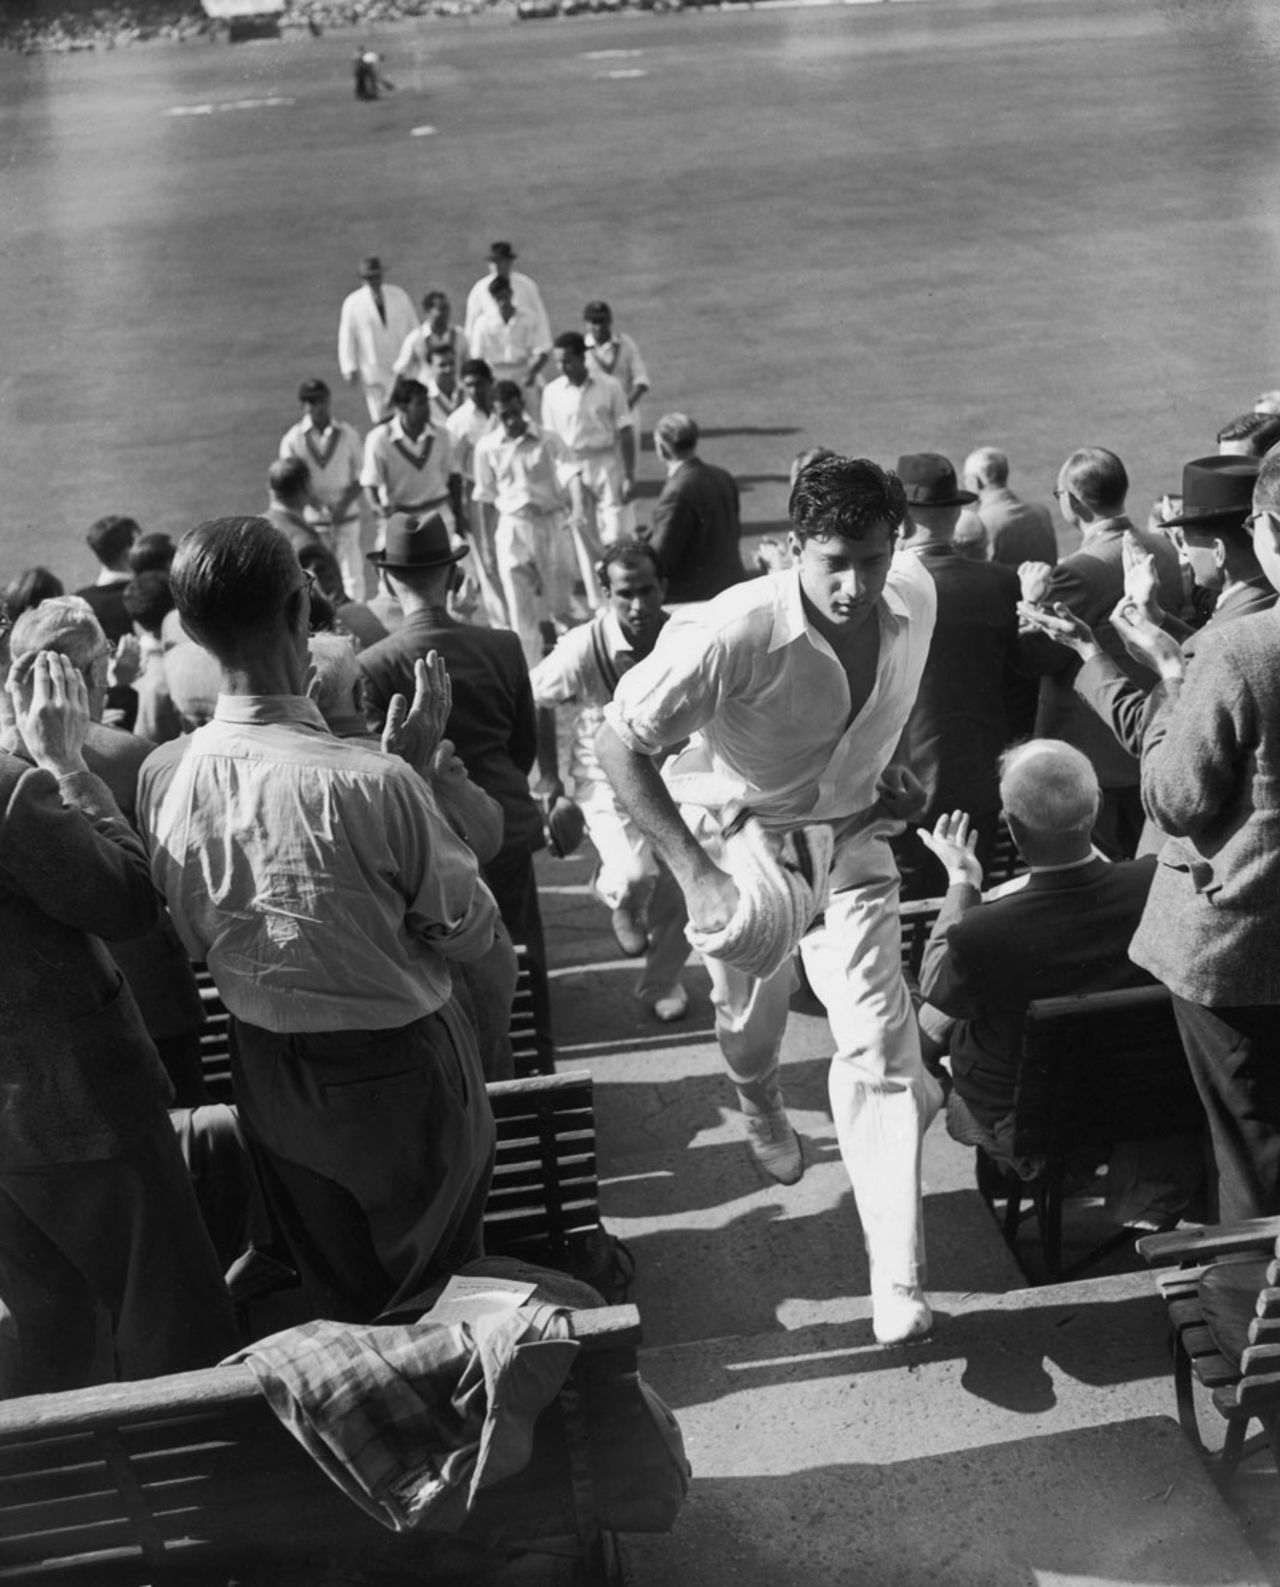 The Pakistan team, led out by Fazal Mahmood, leave the ground after levelling the series, England v Pakistan, 4th Test, The Oval, 5th day, August 17, 1954